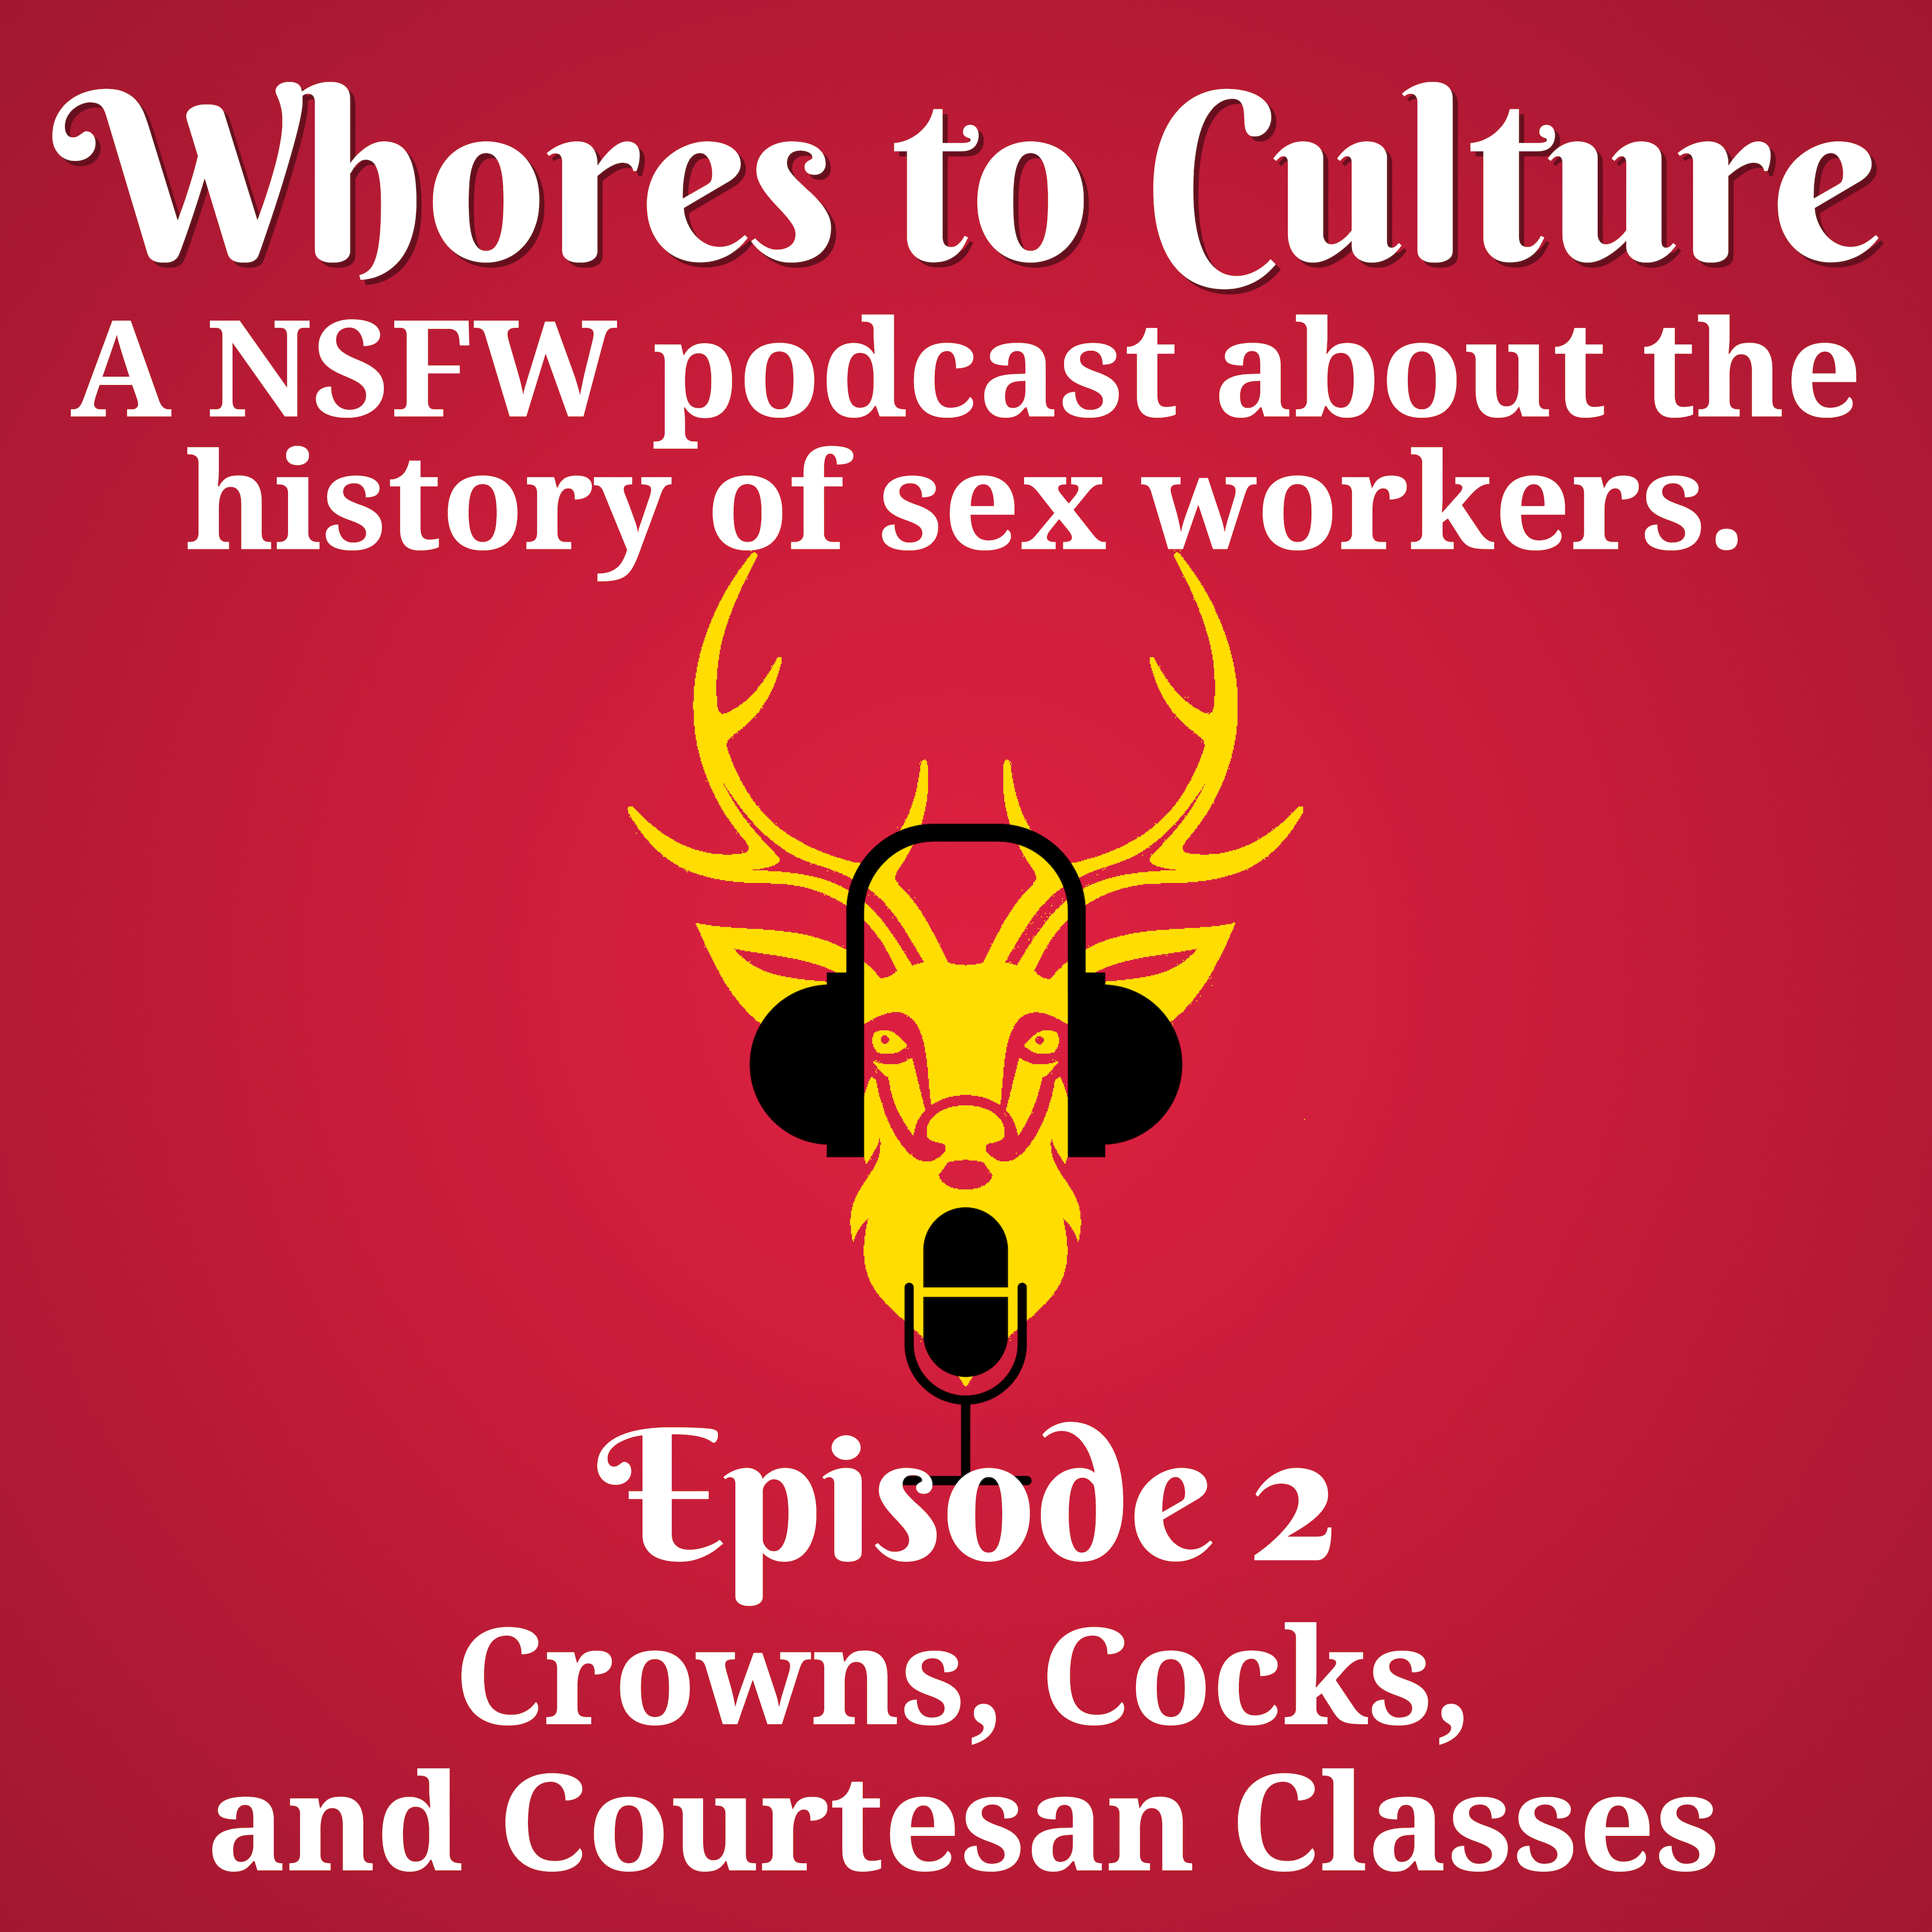 history podcast about sex workers